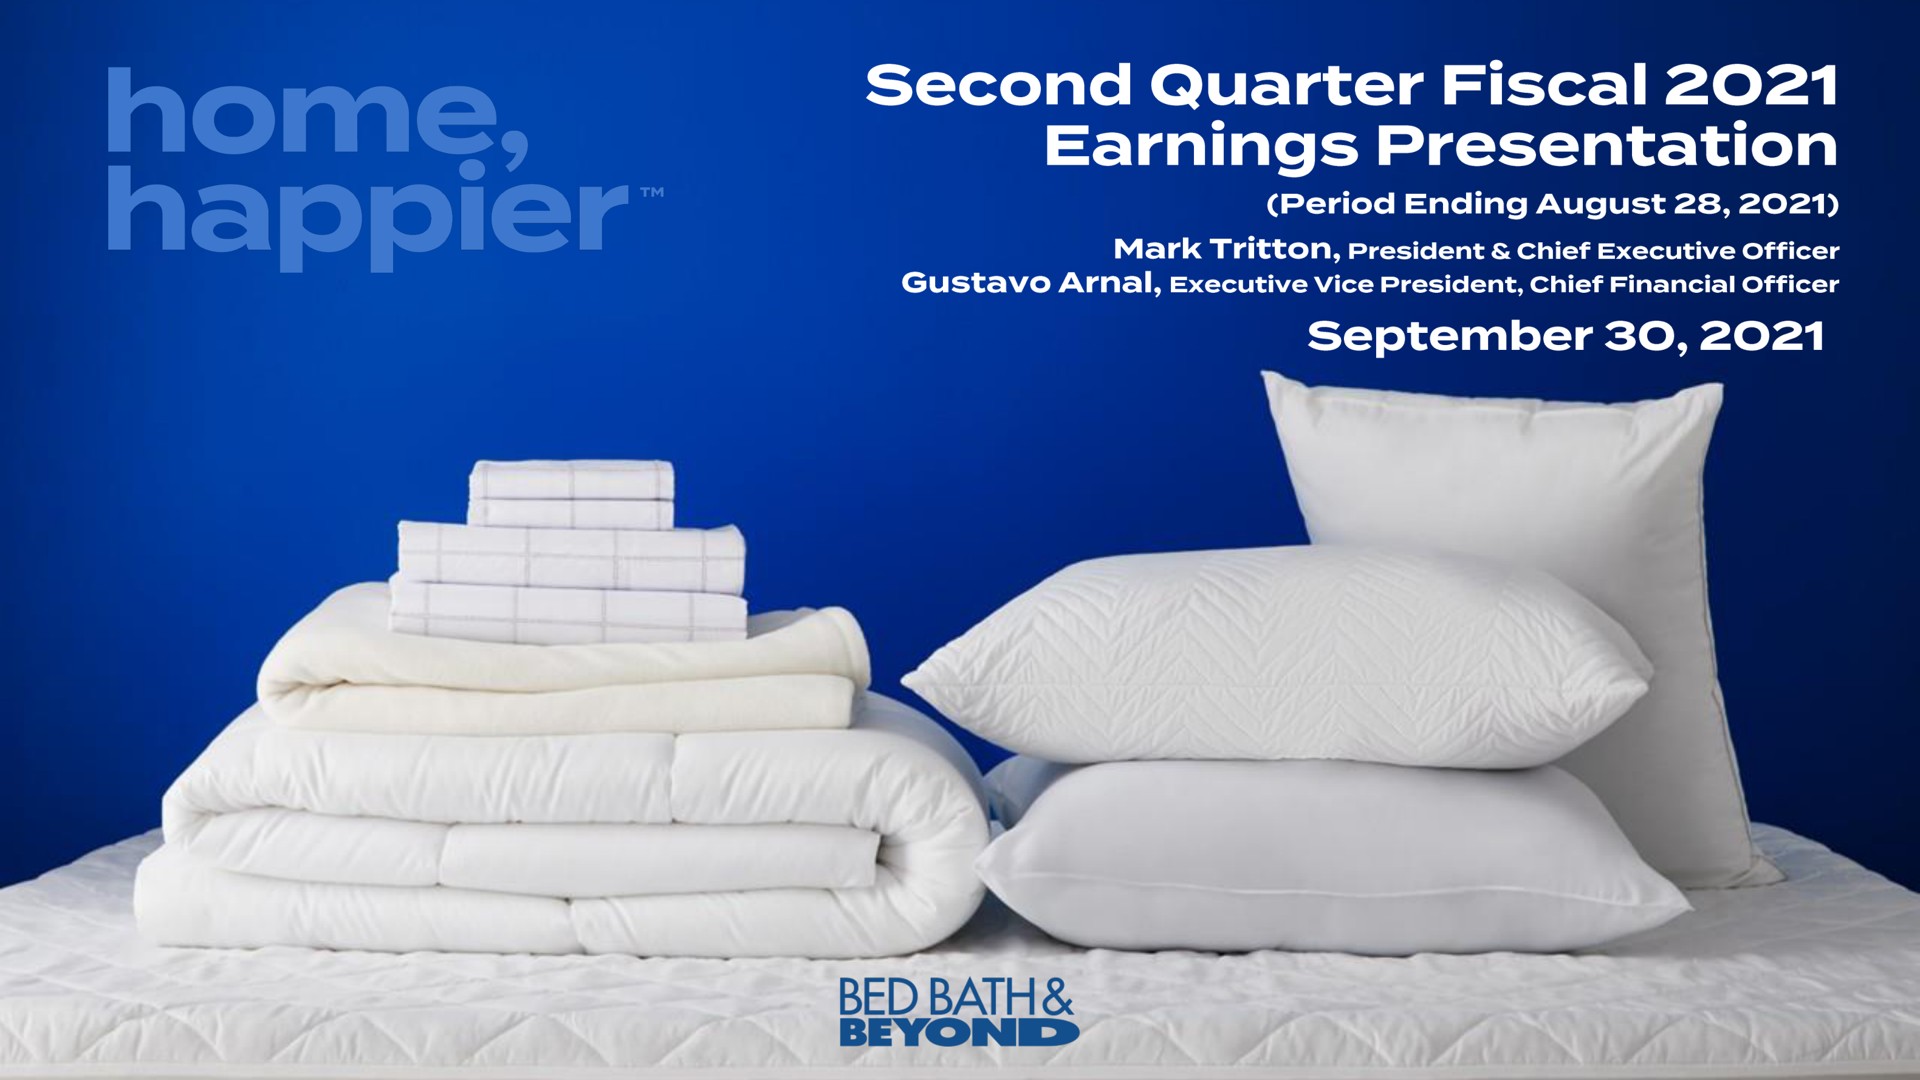 second quarter fiscal earnings presentation bed bath | Bed Bath & Beyond